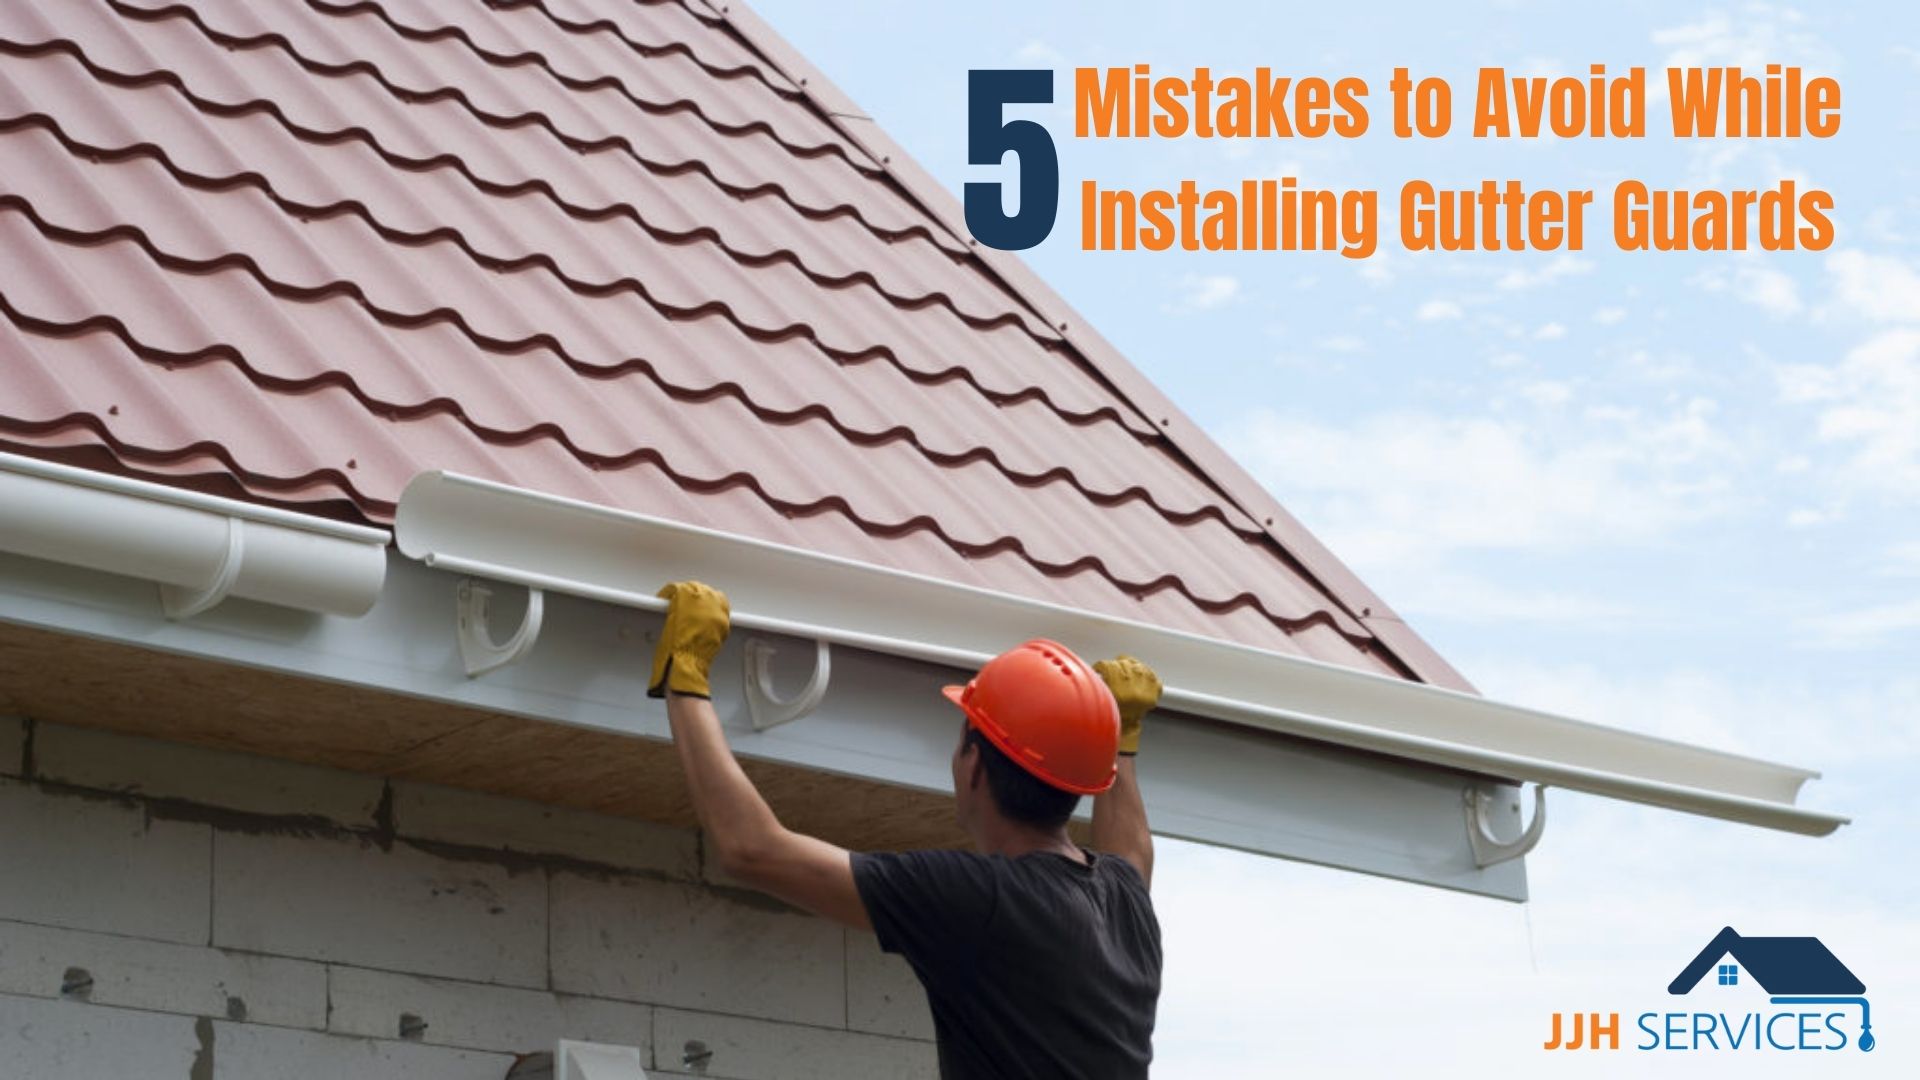 5 Mistakes to Avoid While Installing Gutter Guards